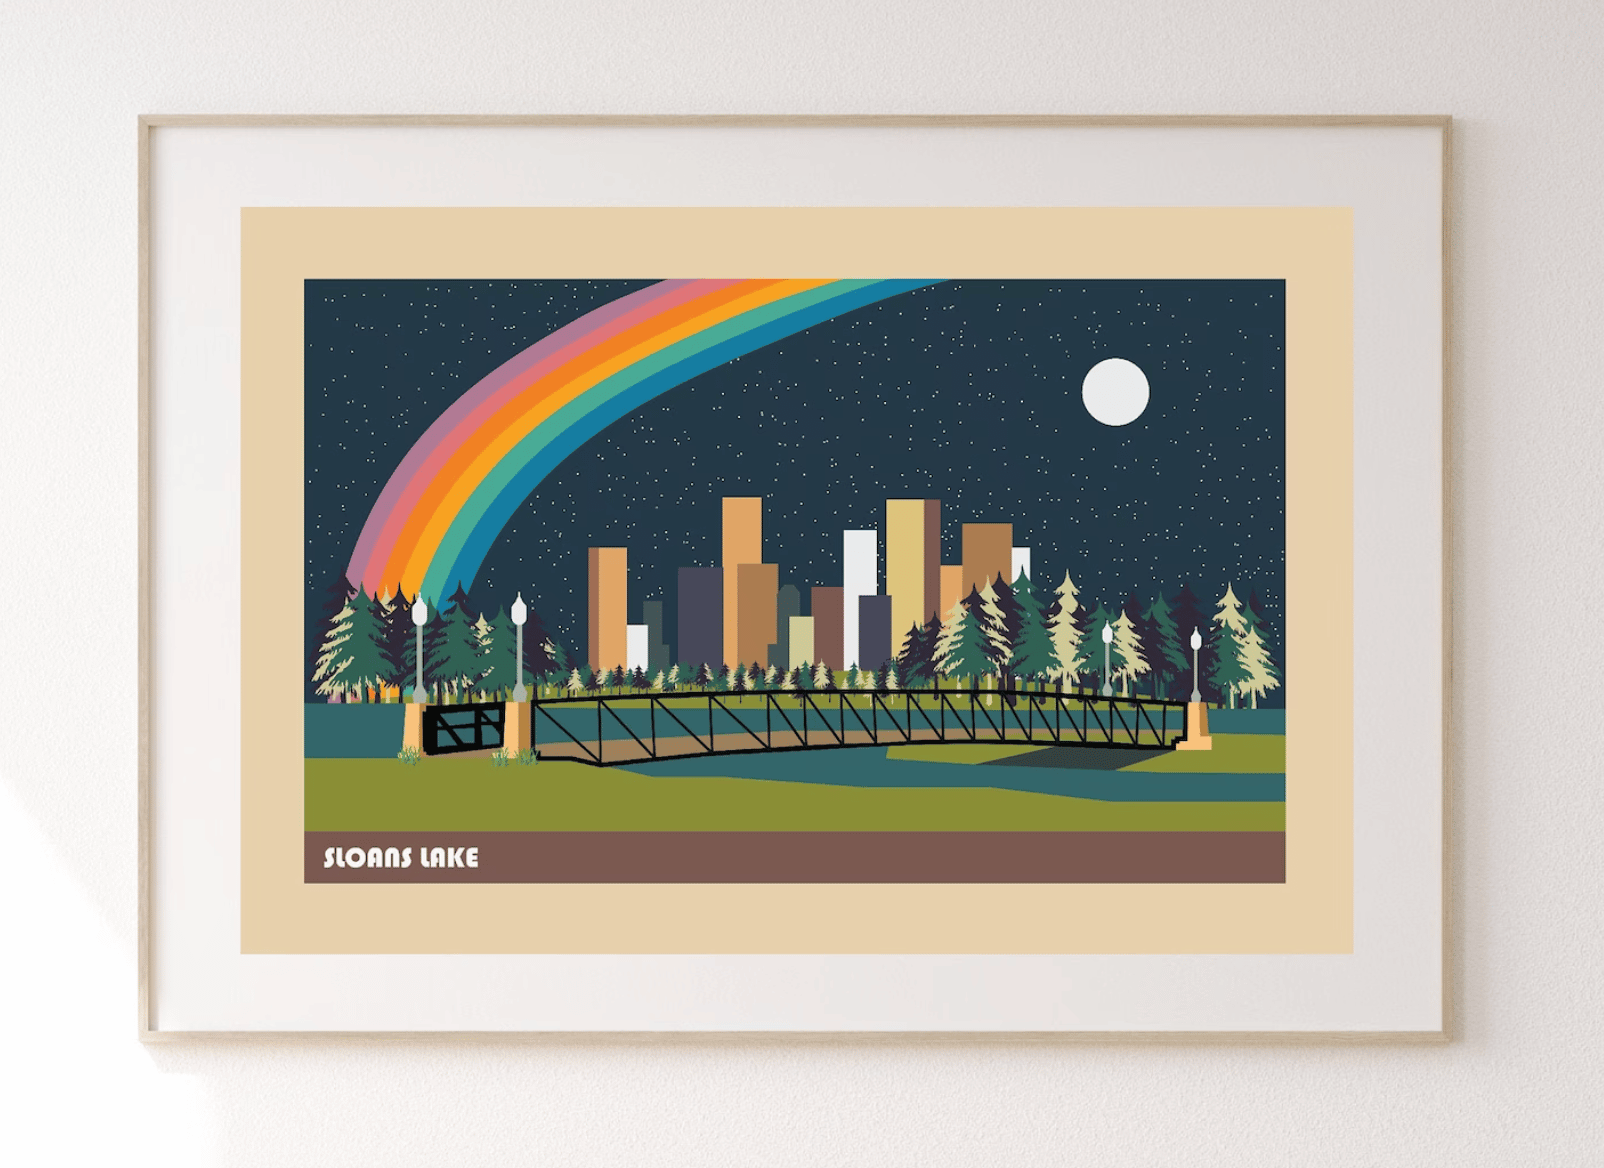 Hanging print of the Denver skyline with a rainbow